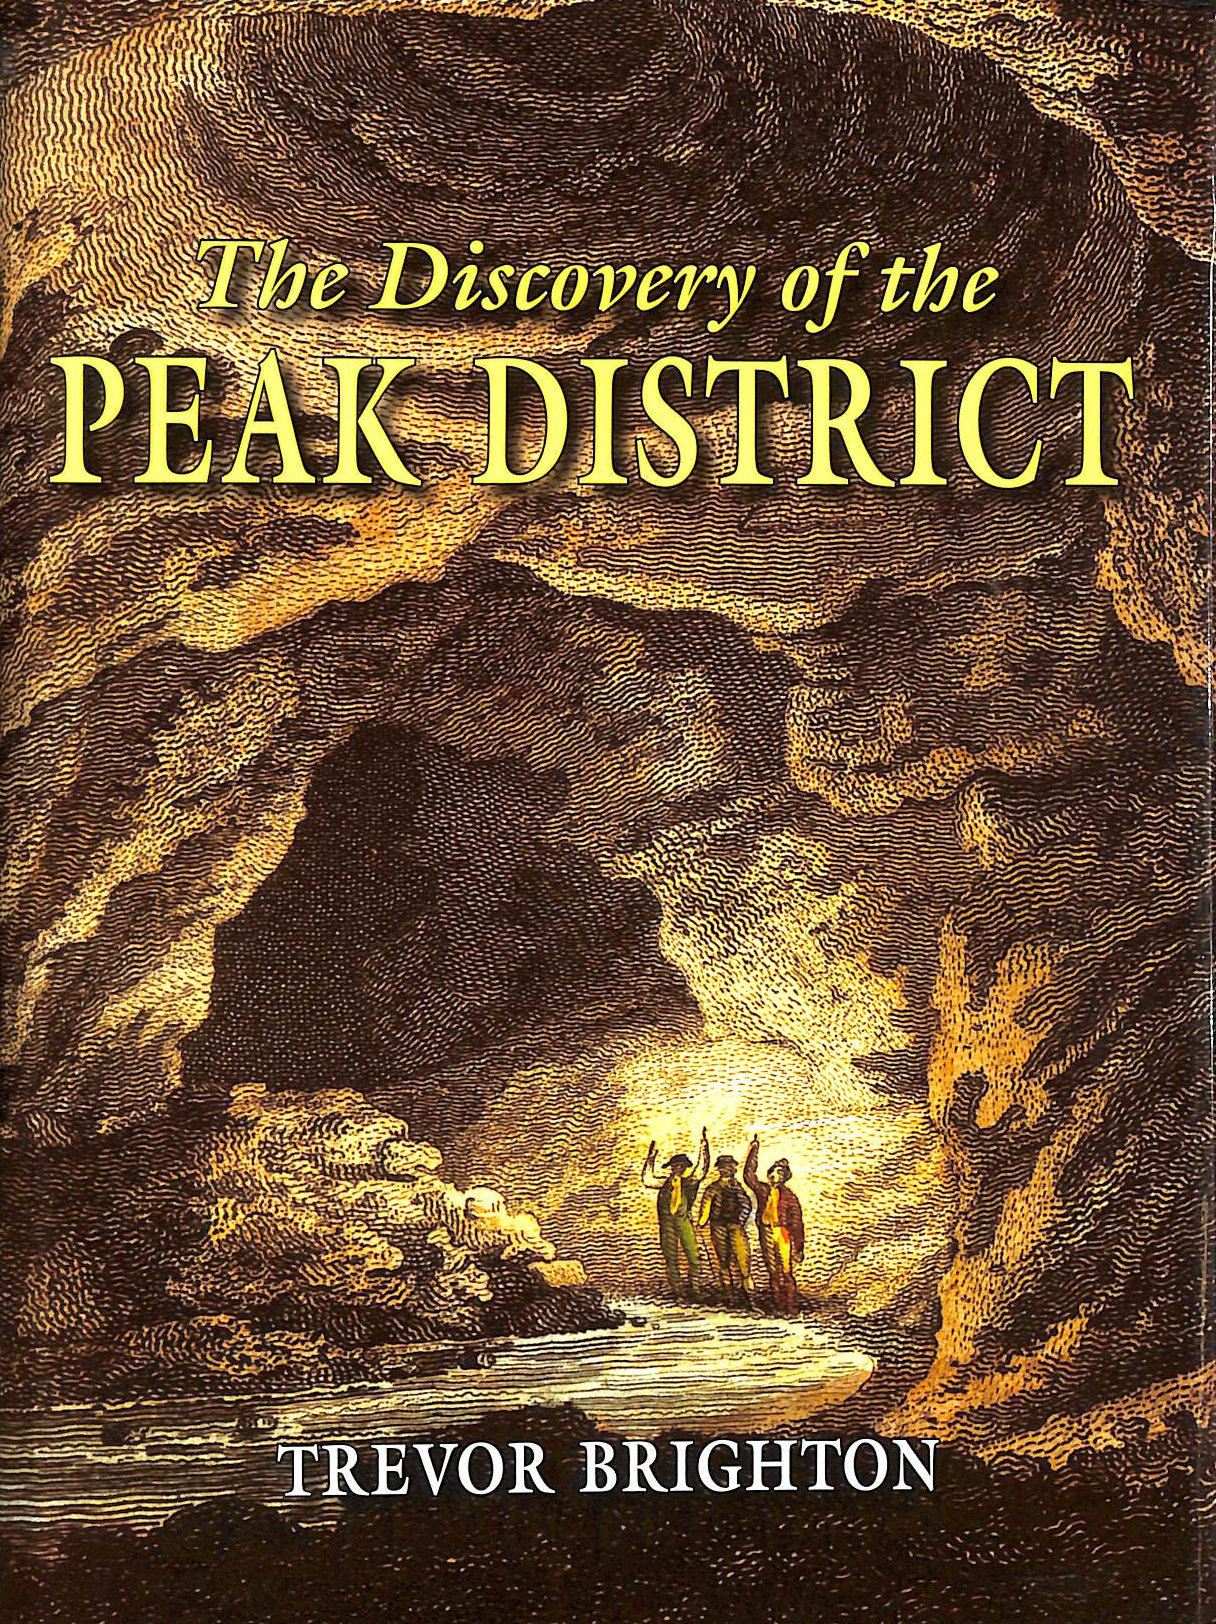 BRIGHTON, TREVOR - The Discovery of the Peak District